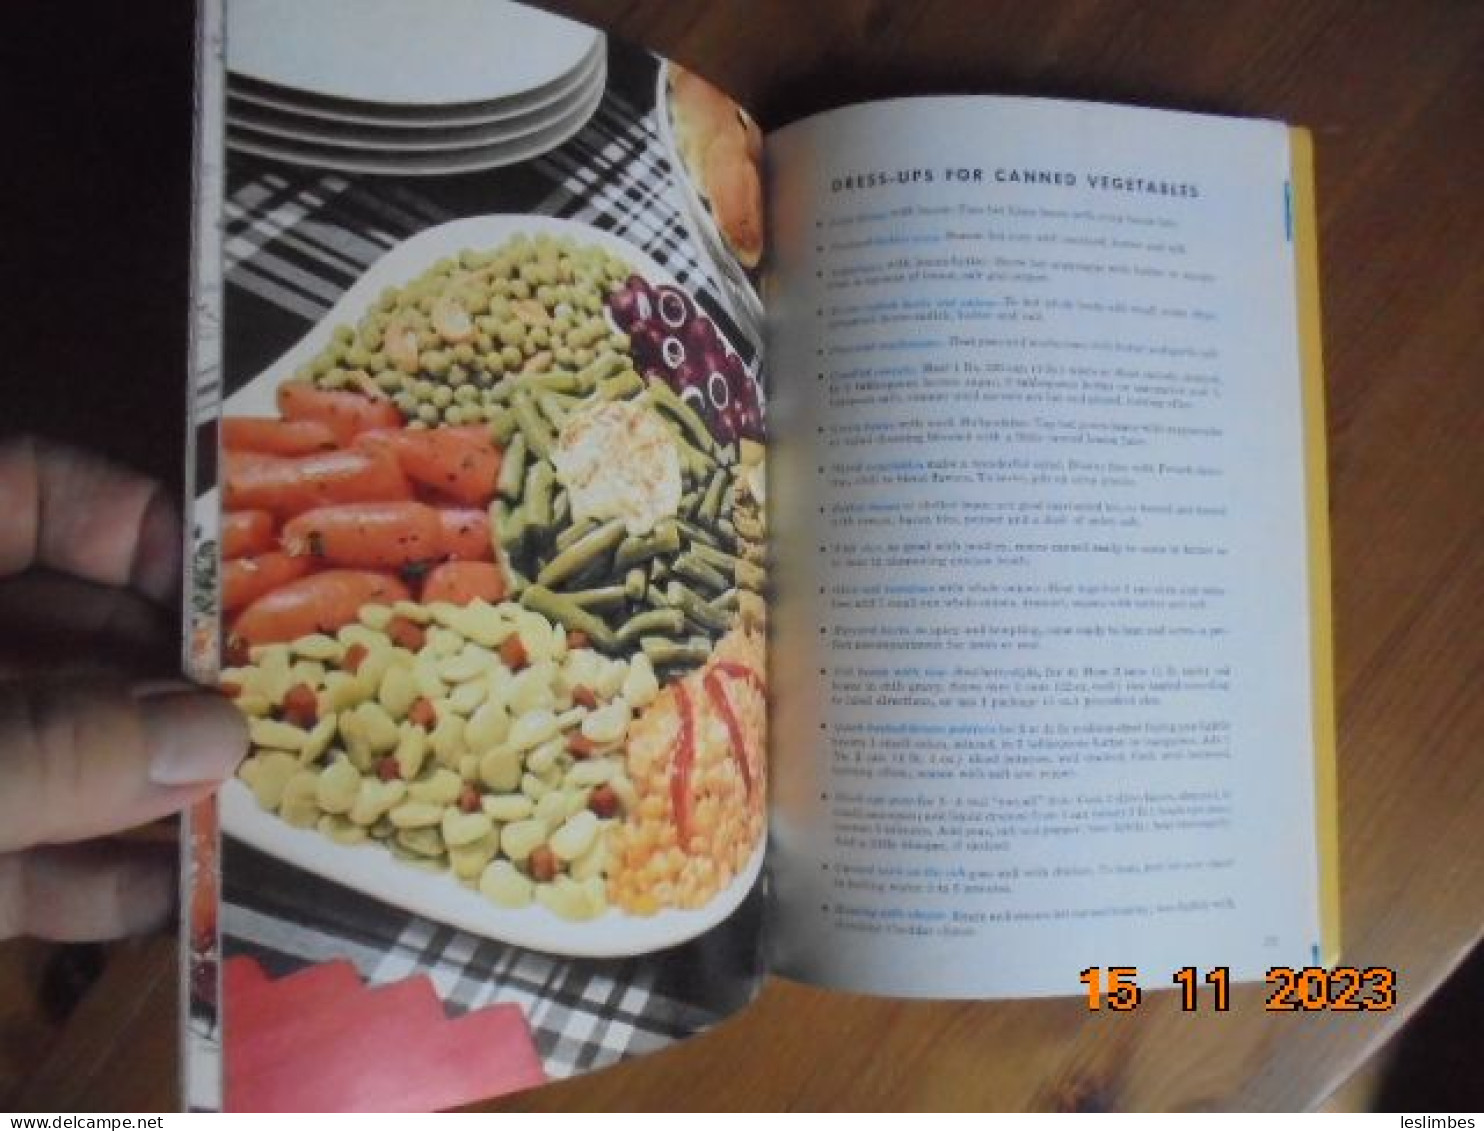 Quick Trick Cookery : Minute Meals & Recipes - CANCO American Can Company - American (US)